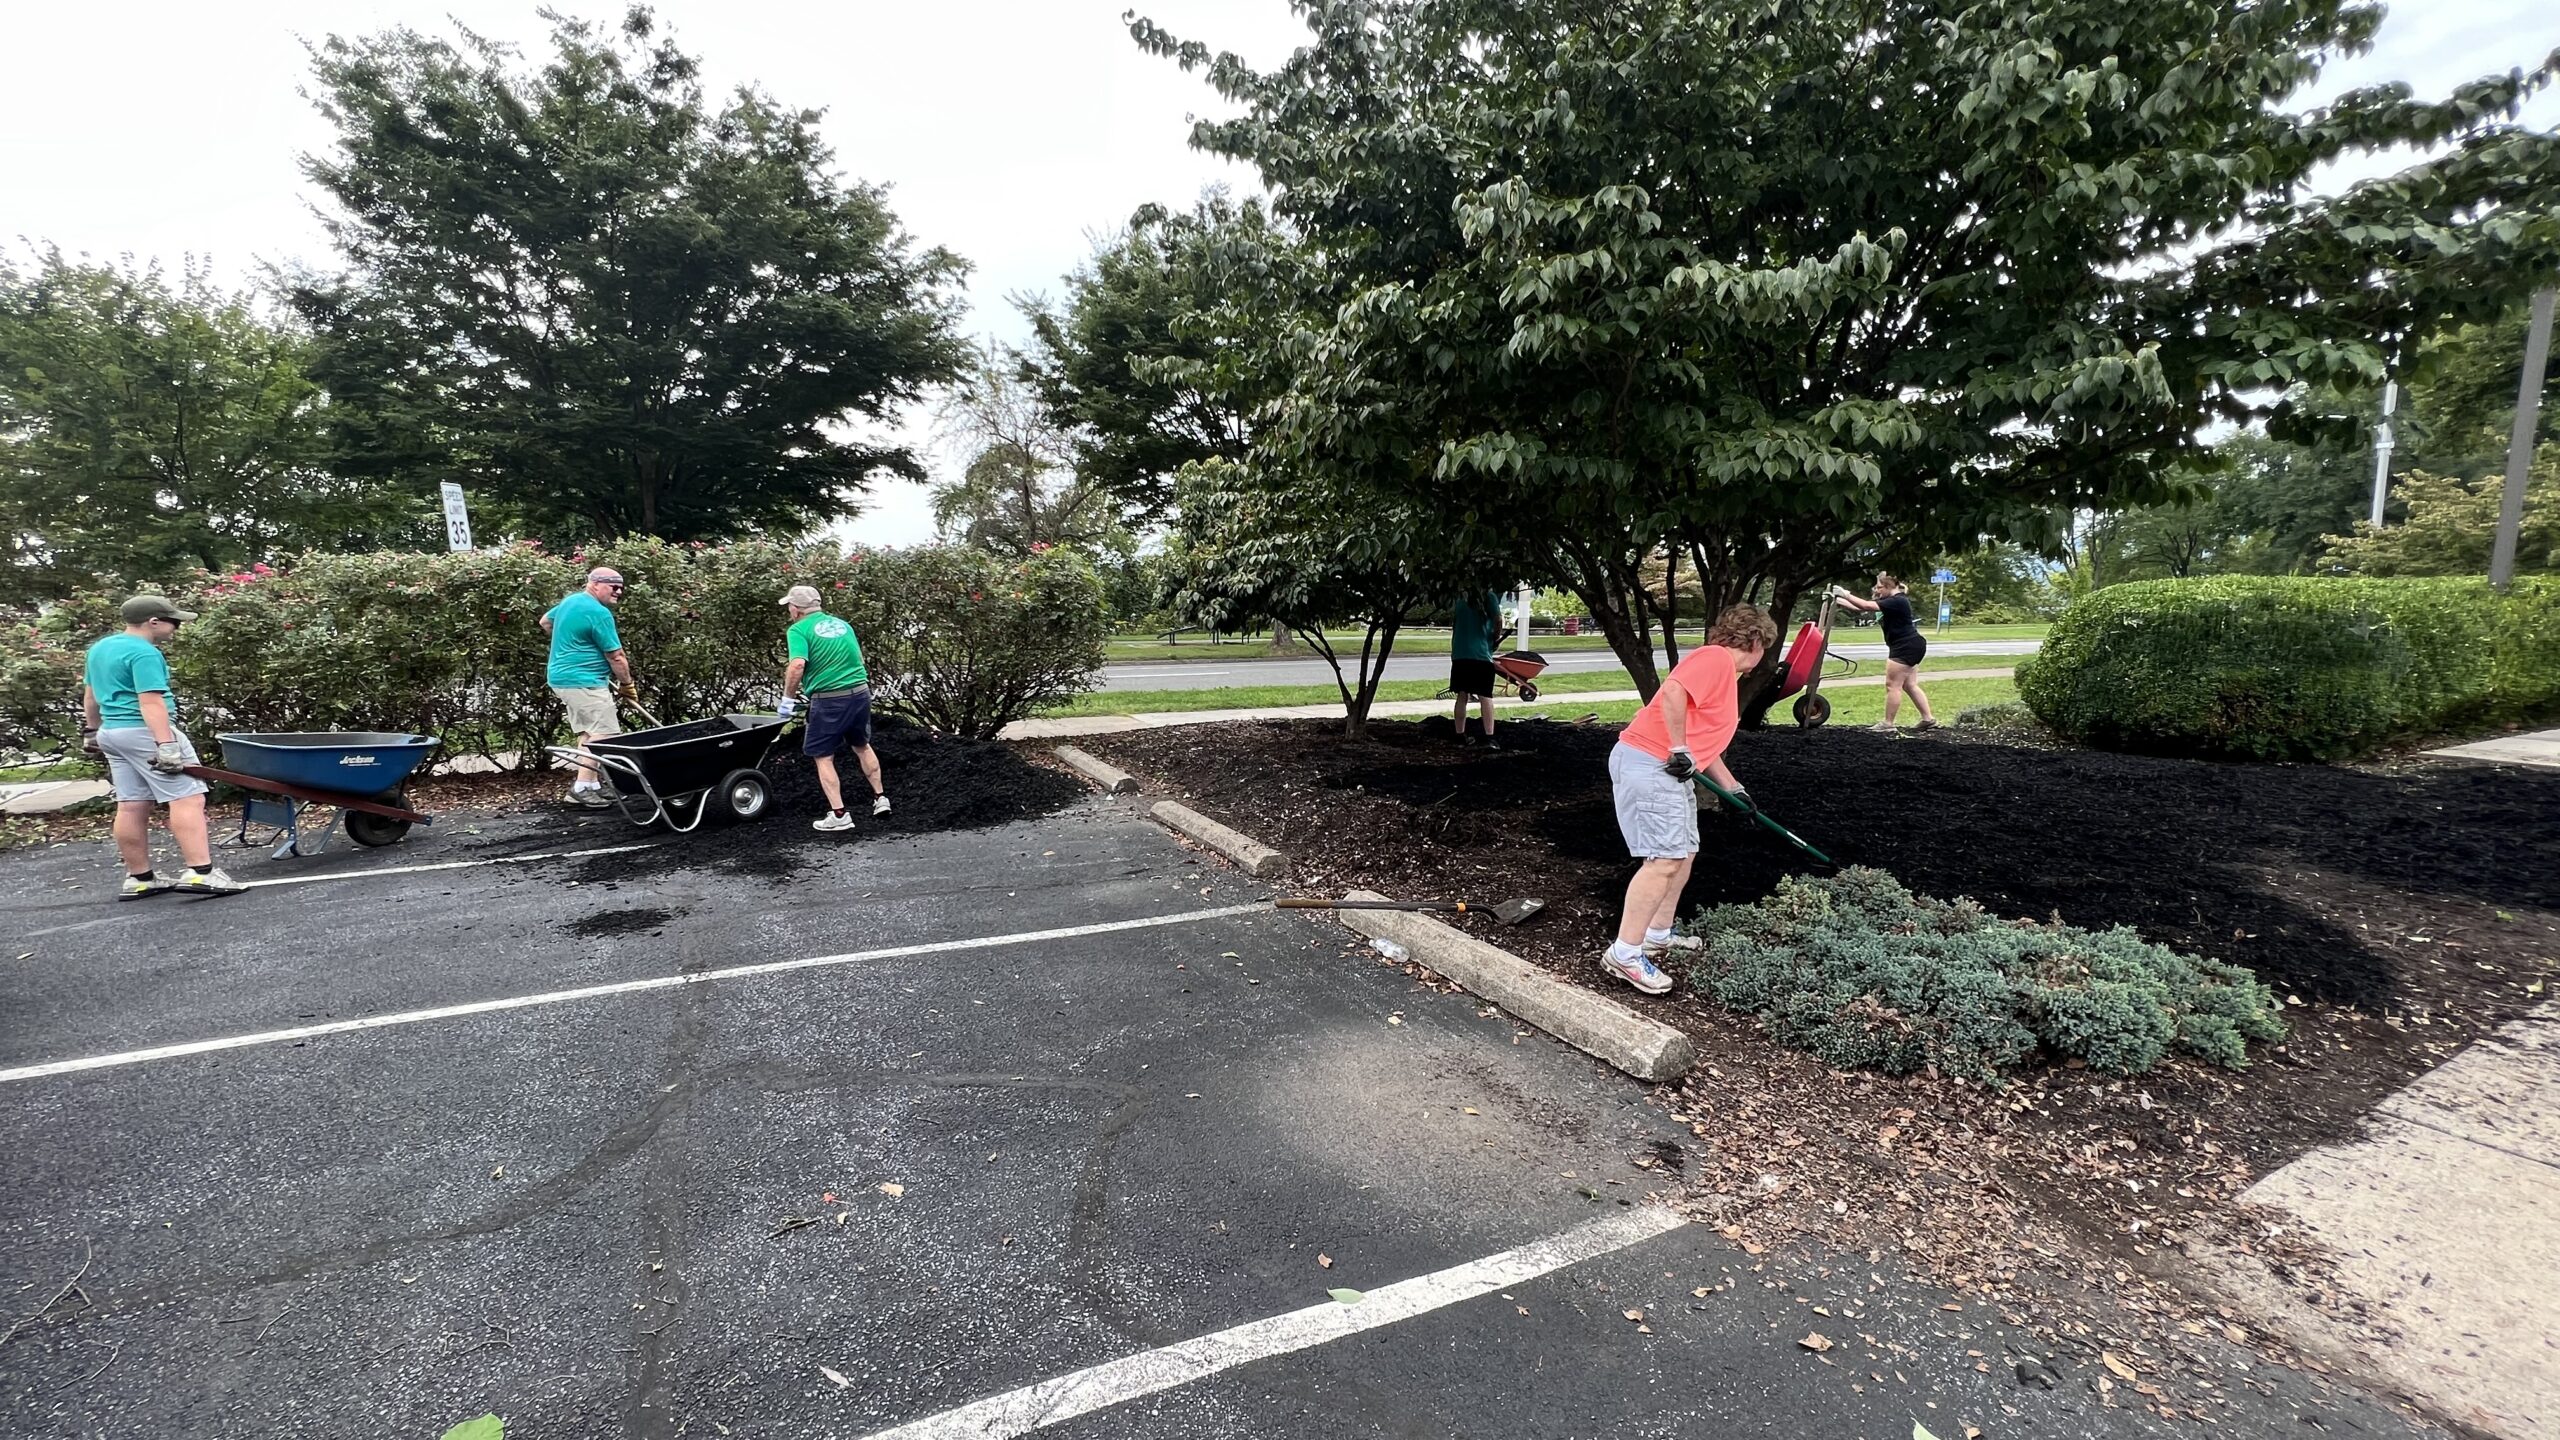 Community & Member Grounds Clean Up Project